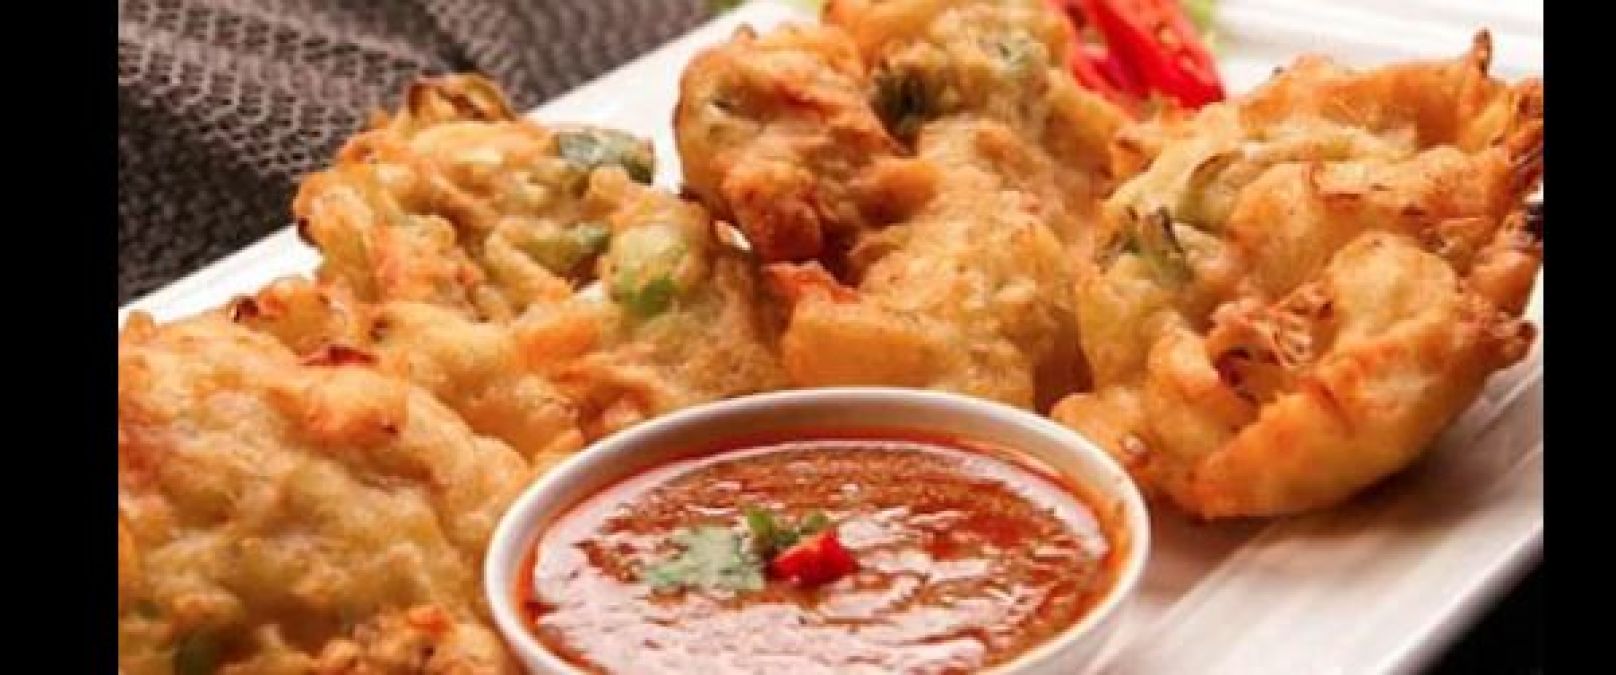 Today, weather is cold, so definitely make cabbage Pakodas